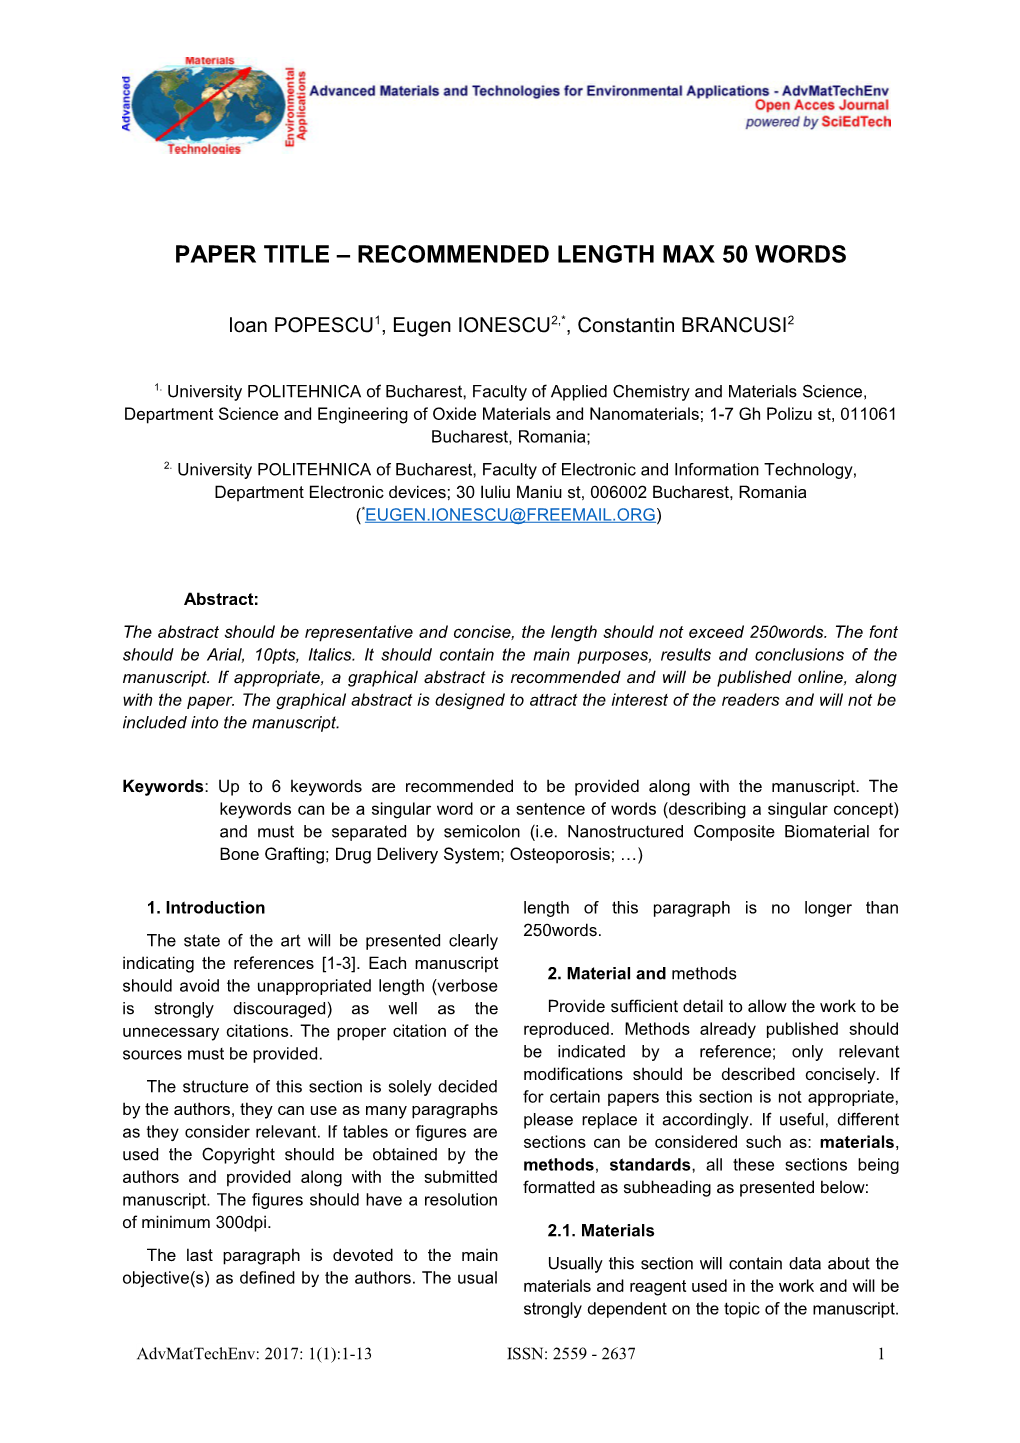 PAPER TITLE Recommended Length Max 50 Words